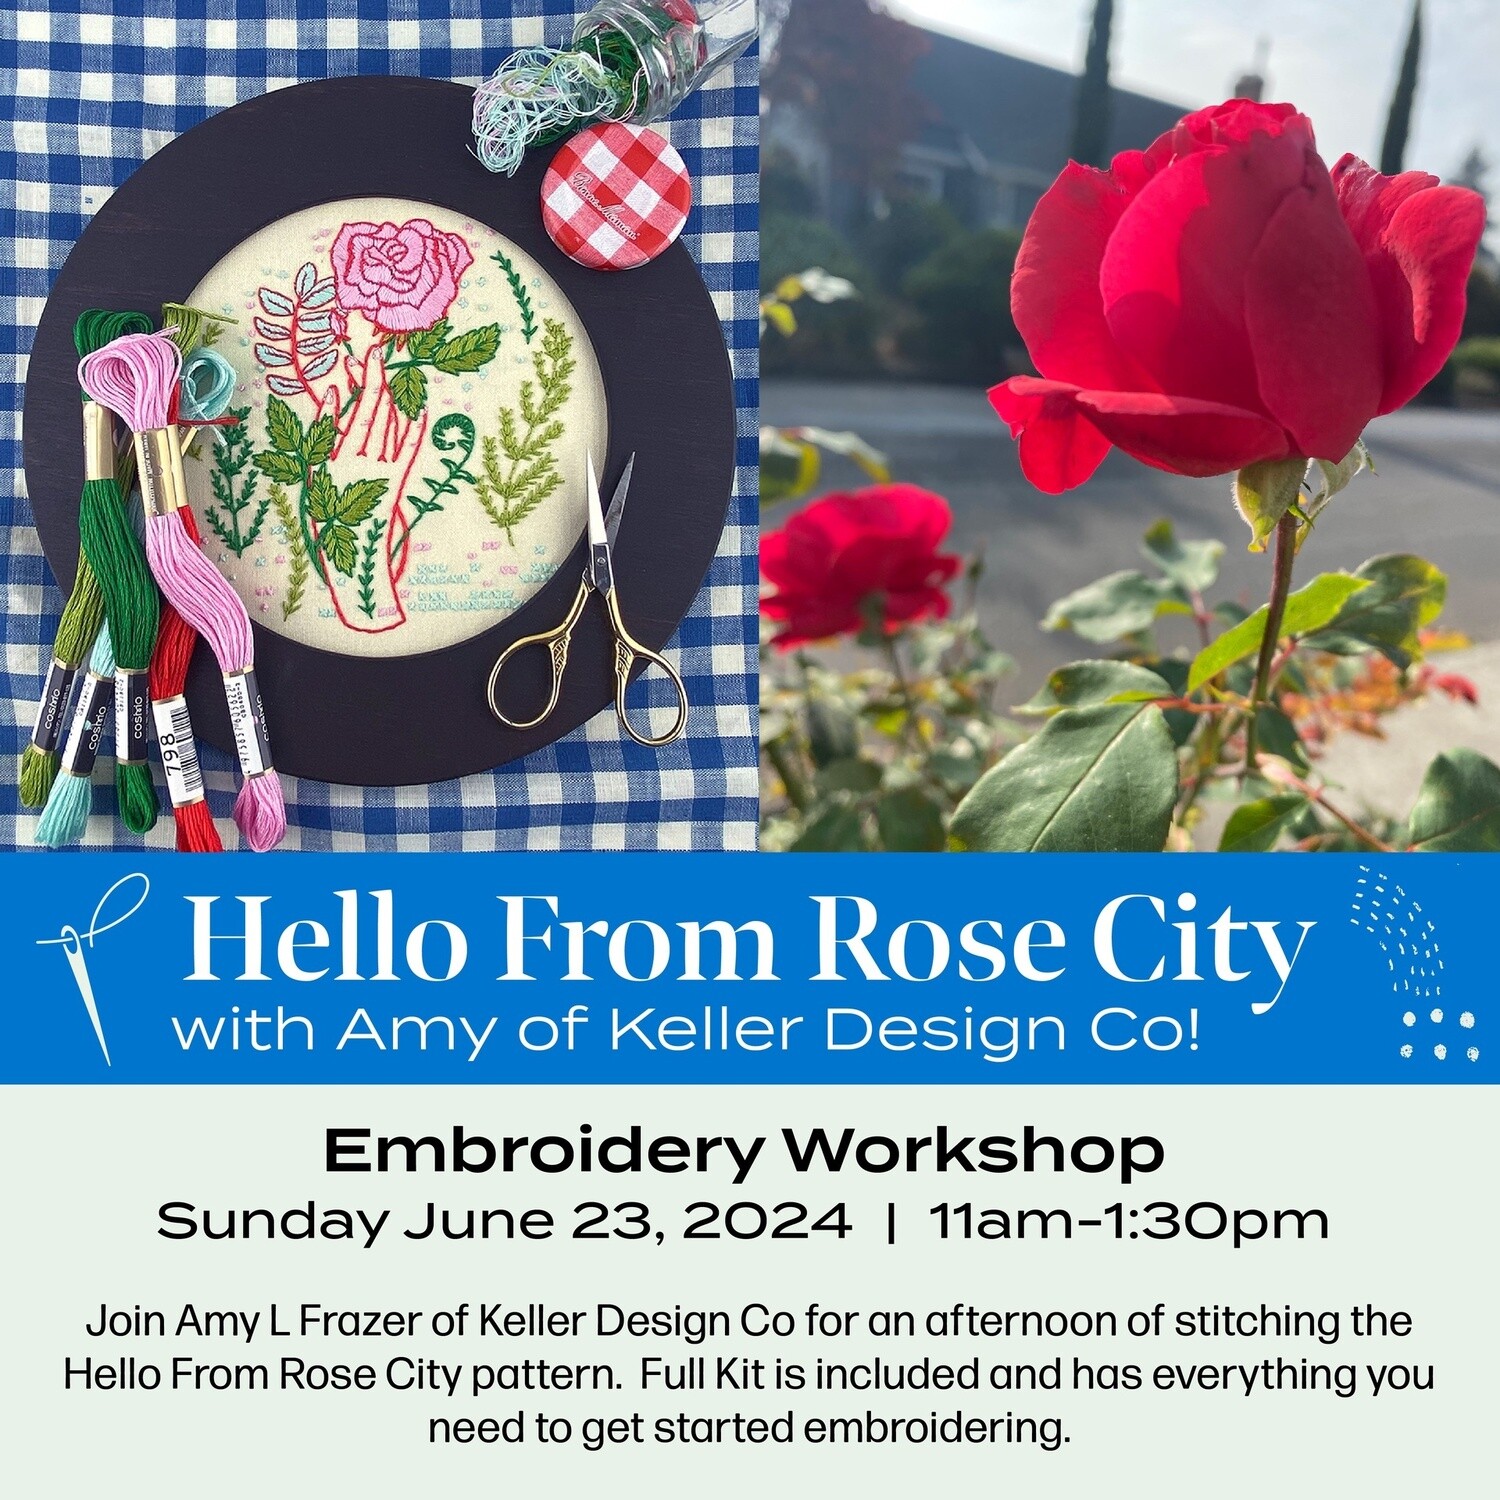 Hello from Rose City Embroidery Workshop (June 23rd)